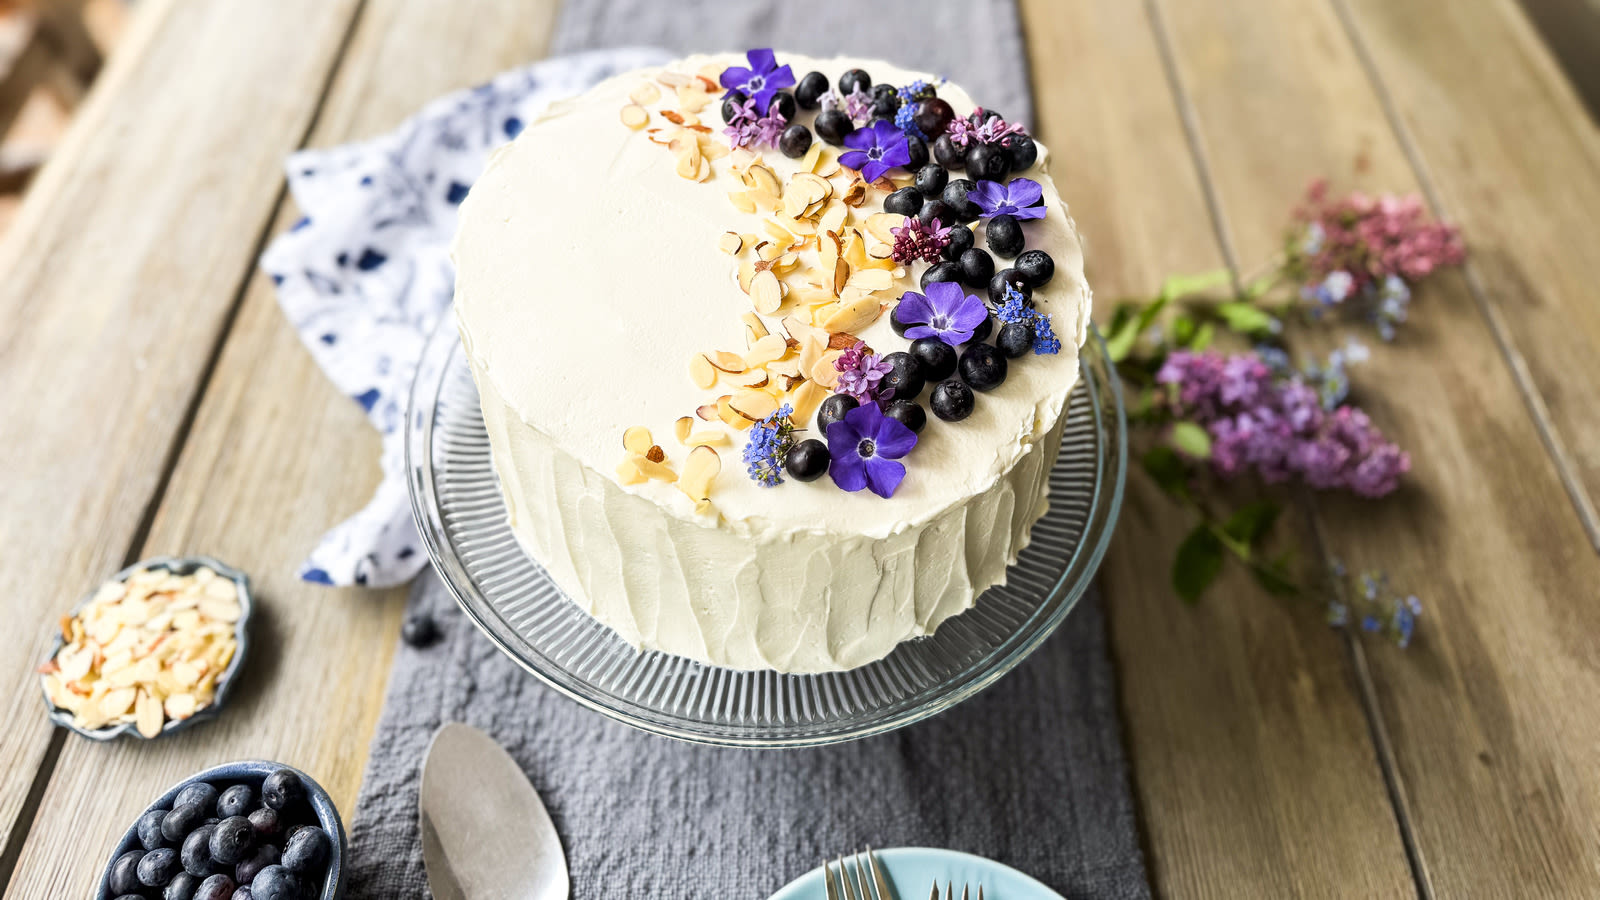 Blueberry And Almond Chantilly Cake Recipe